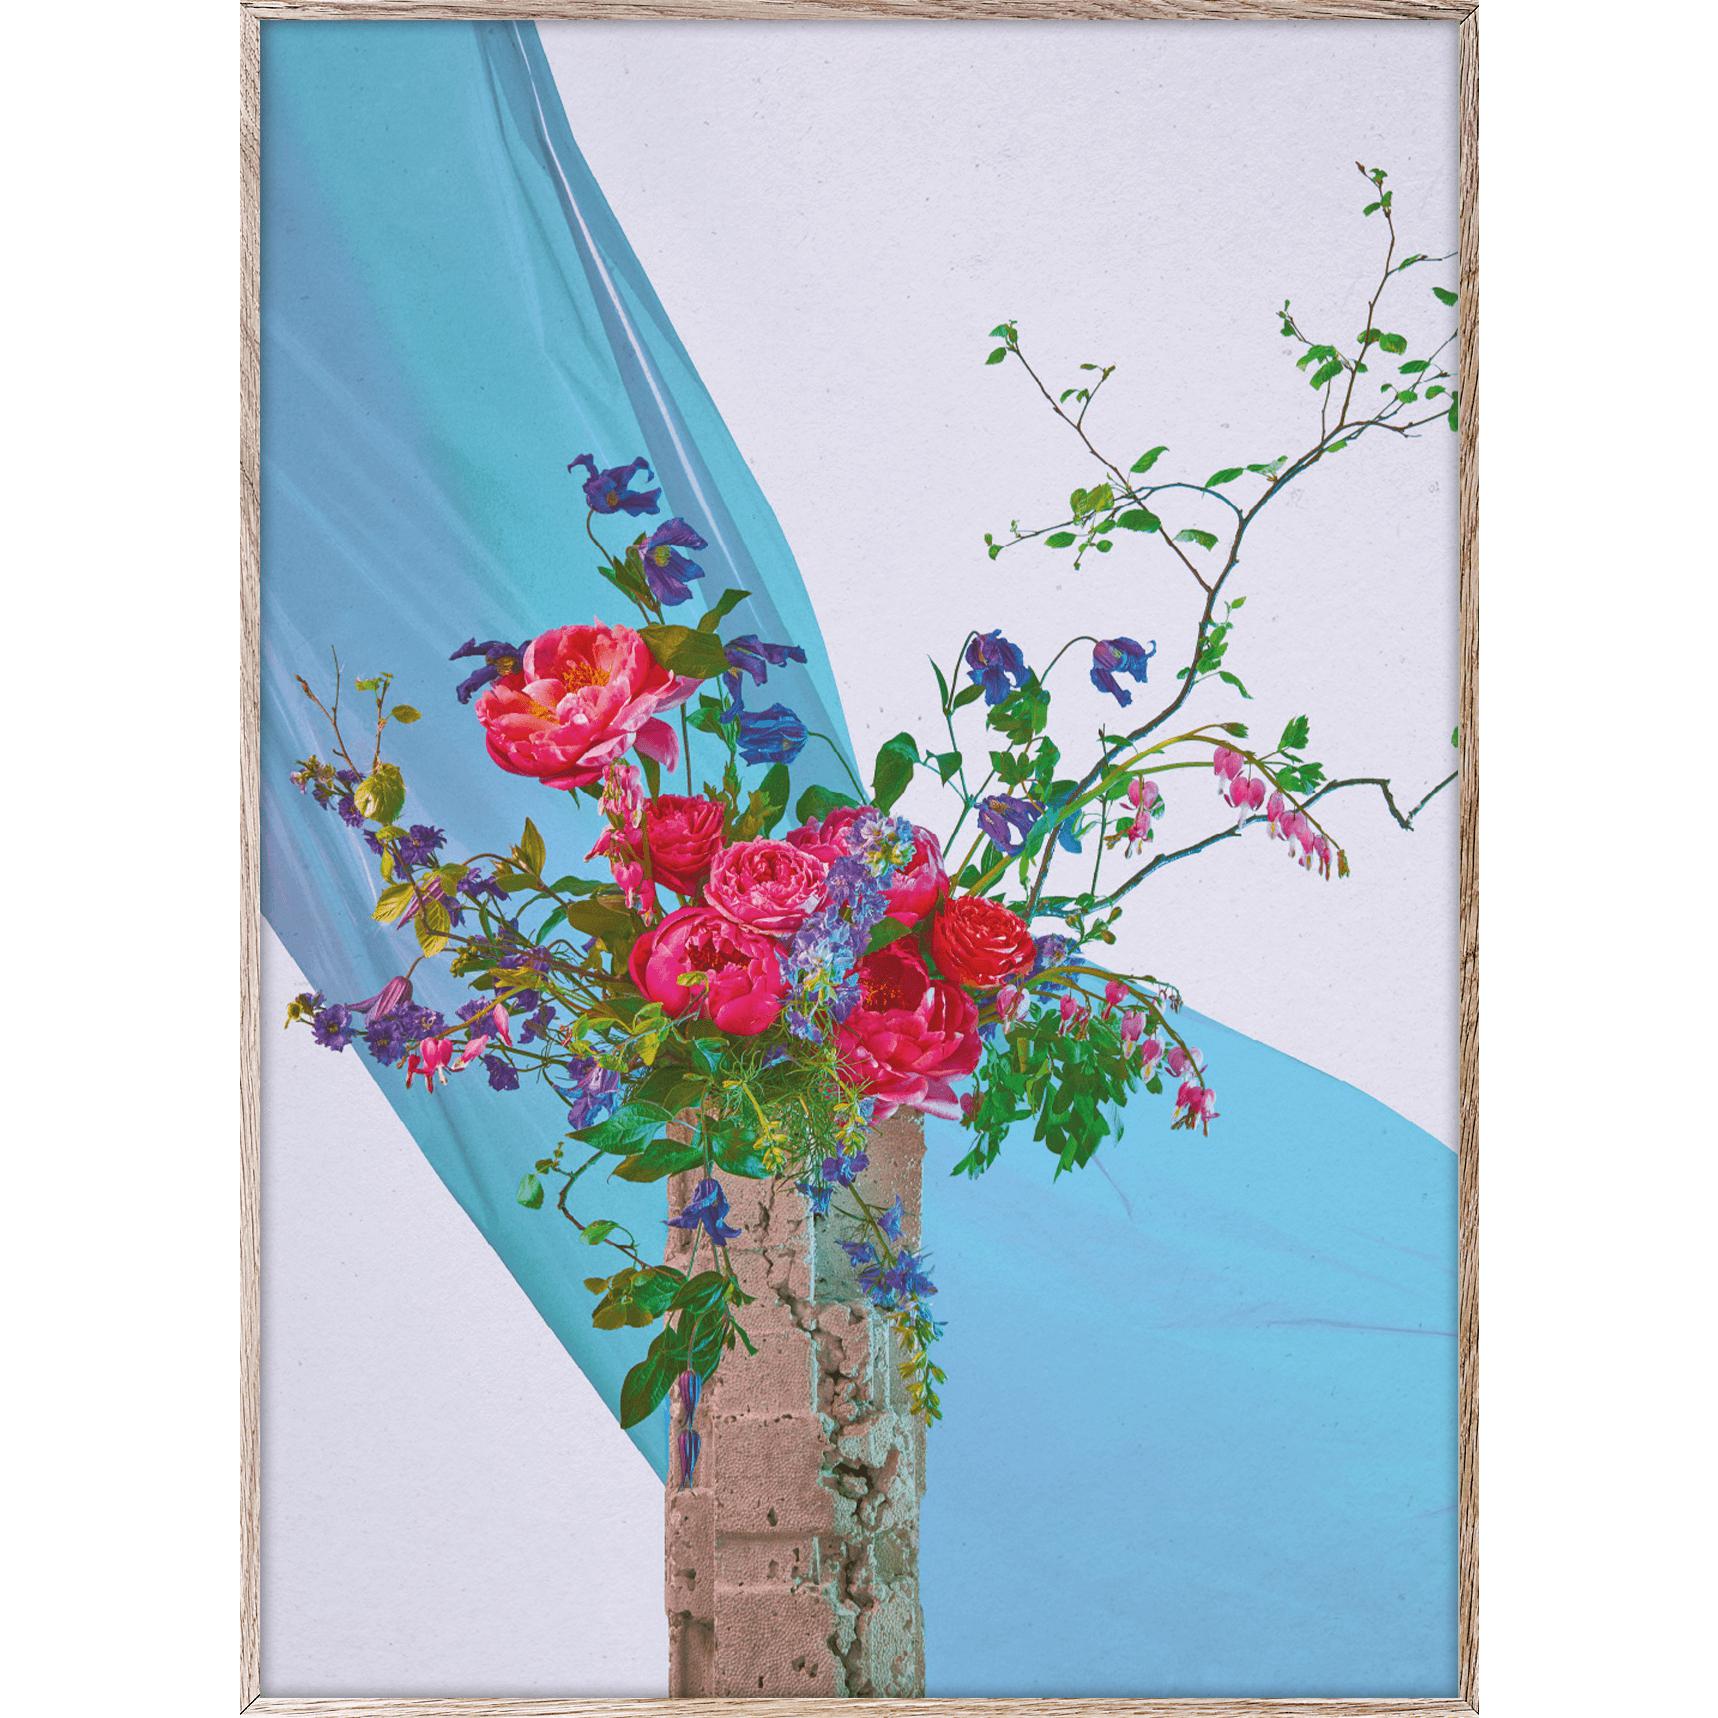 Paper Collective Bloom 05 Poster 50x70 Cm, Turquoise